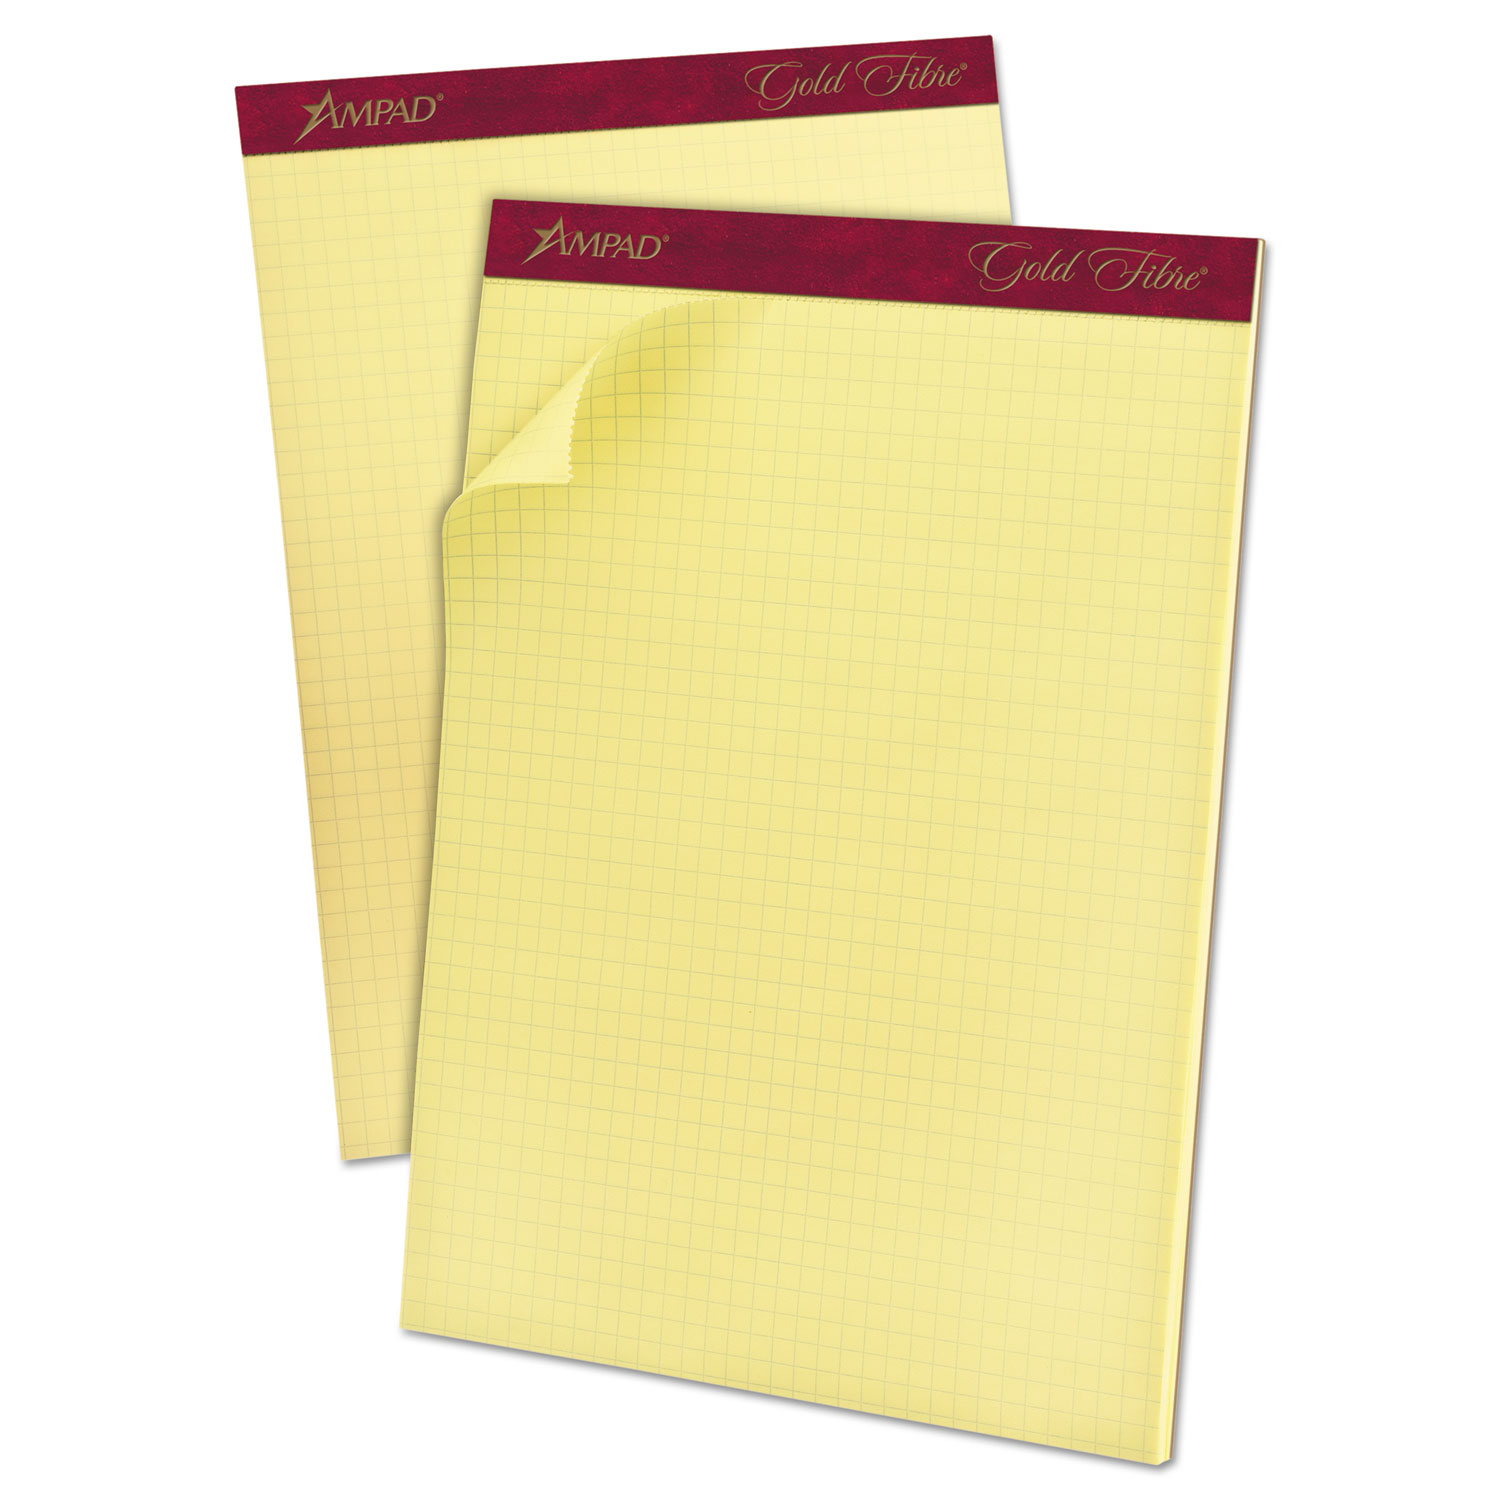  Ampad 22-143 Gold Fibre Canary Quadrille Pads, 4 sq/in Quadrille Rule, 8.5 x 11.75, Canary, 50 Sheets (TOP22143) 